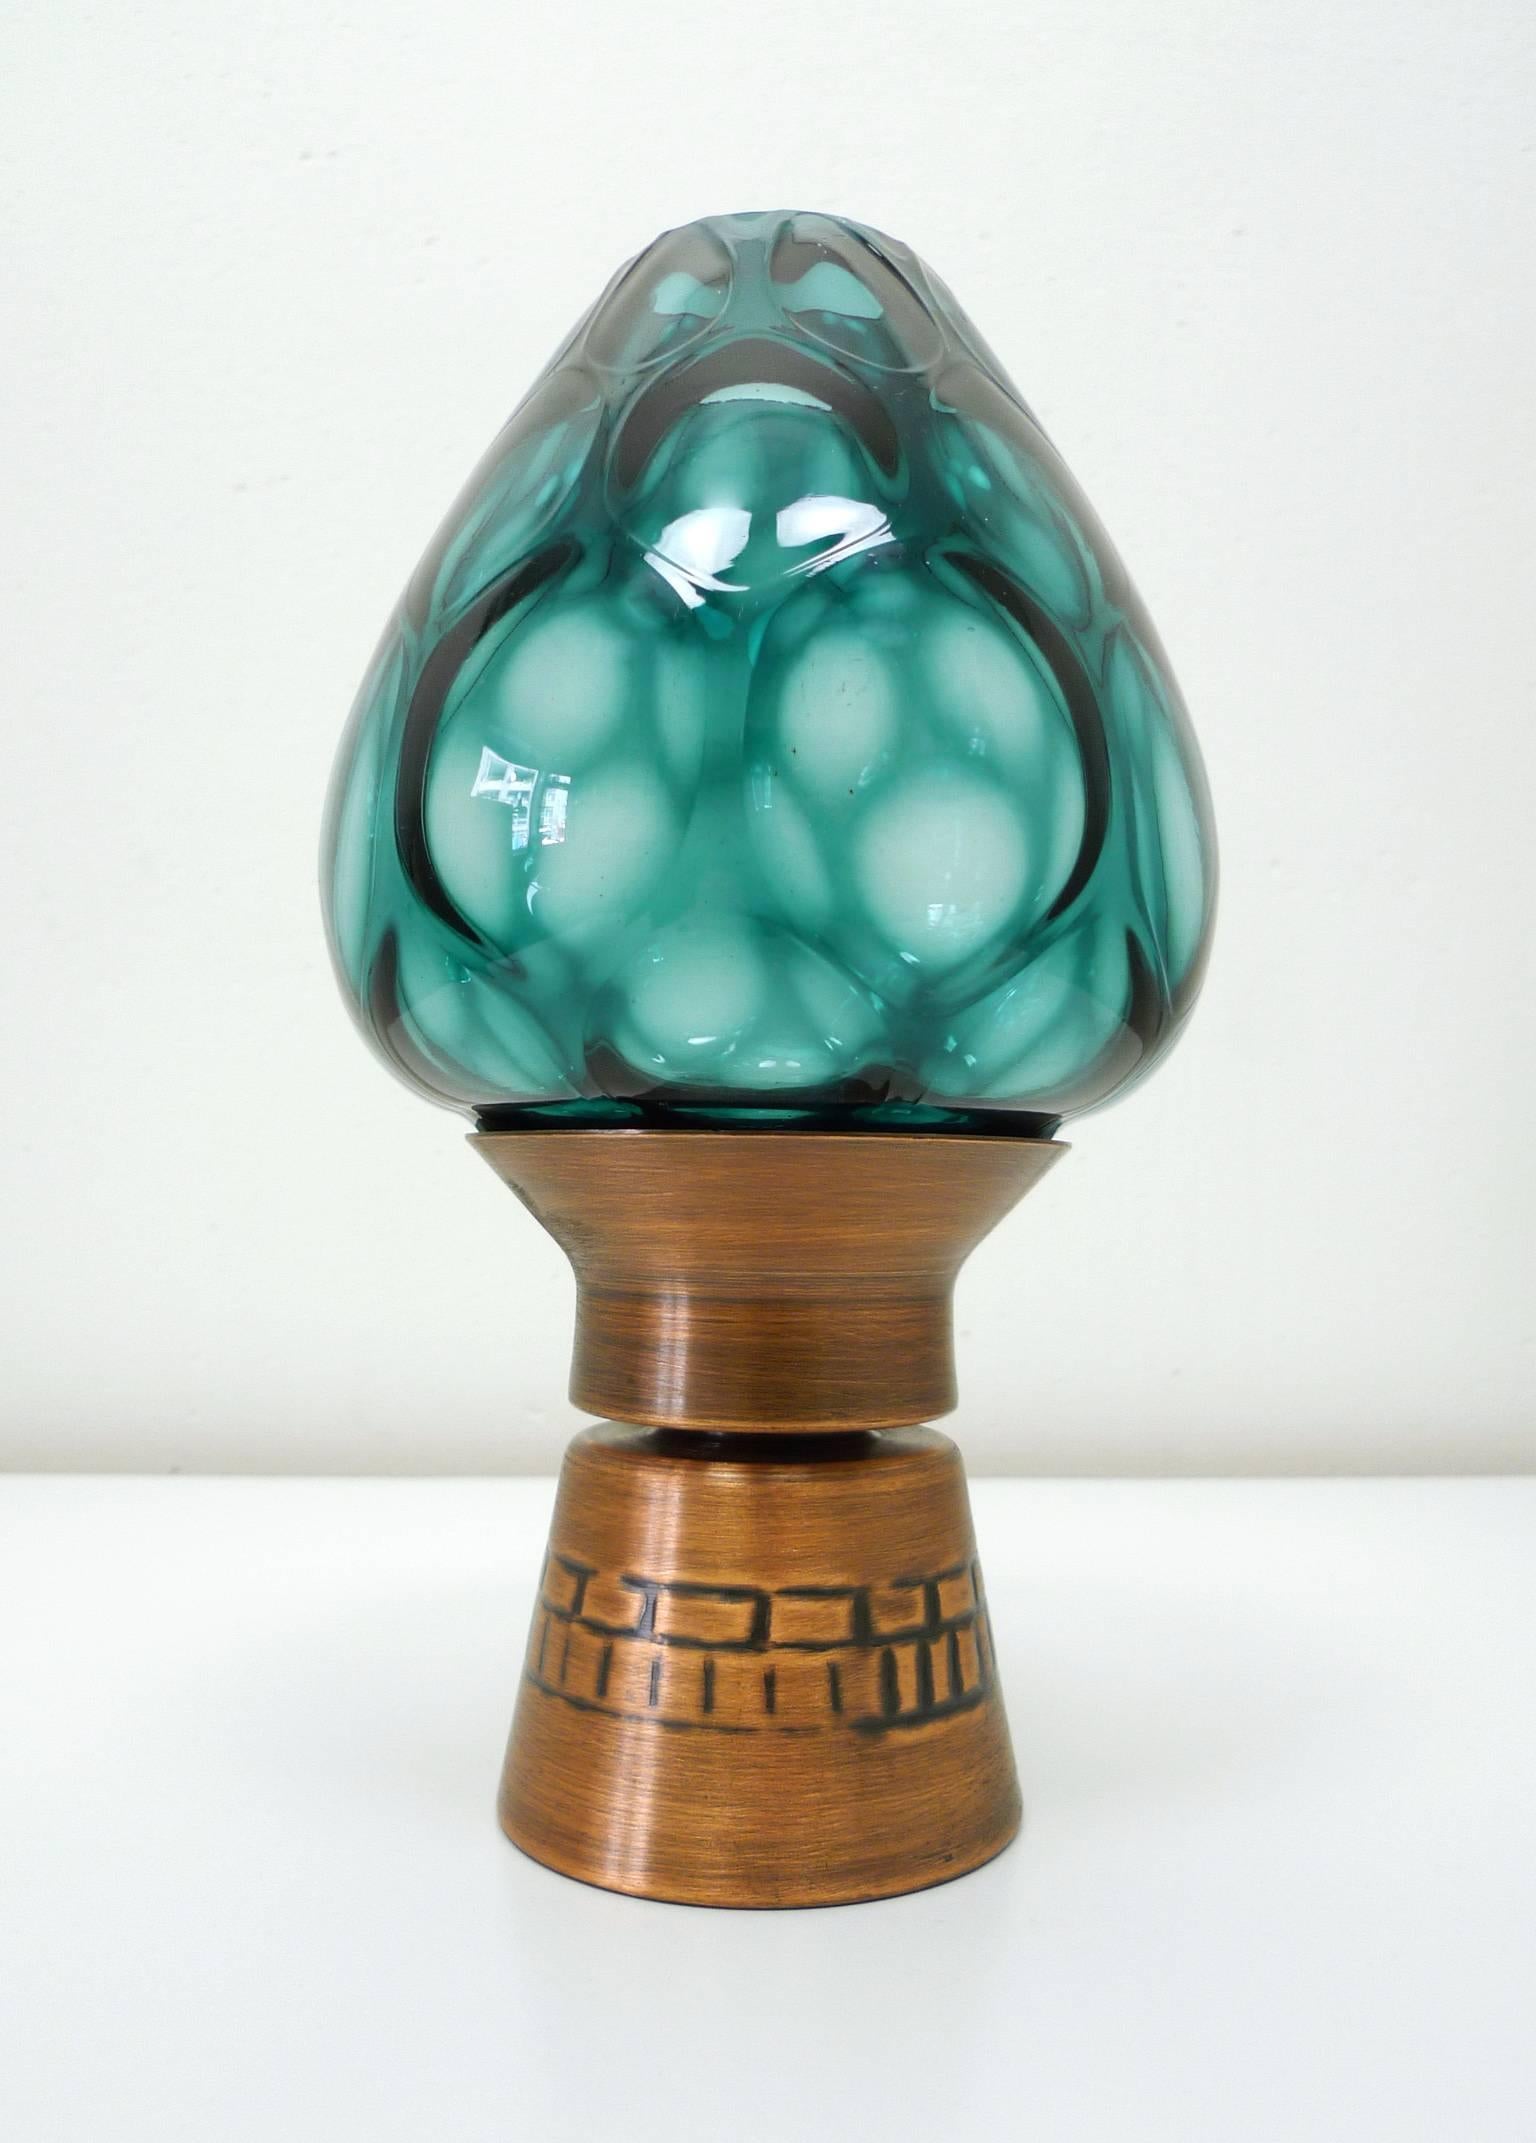 Wind light for a candle with a tumbling glass screen and copper stand from the 1960s. It was produced by the Kristallglaswerk Hirschberg in Germany.
It is in a very good original condition.